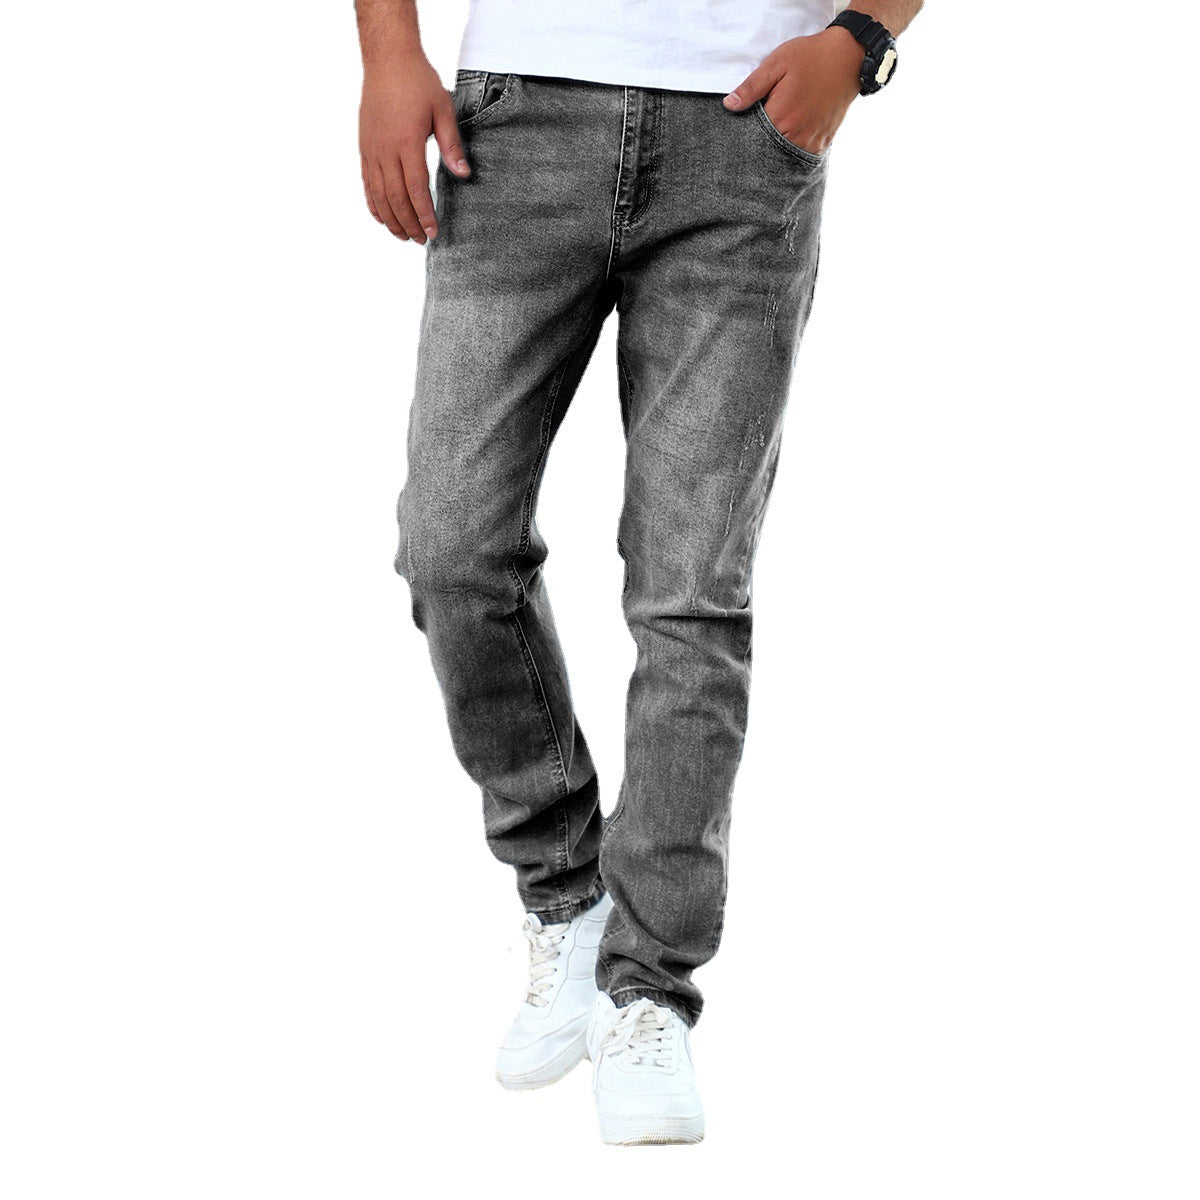 Men's Jeans Gray Trousers Stretch Skinny